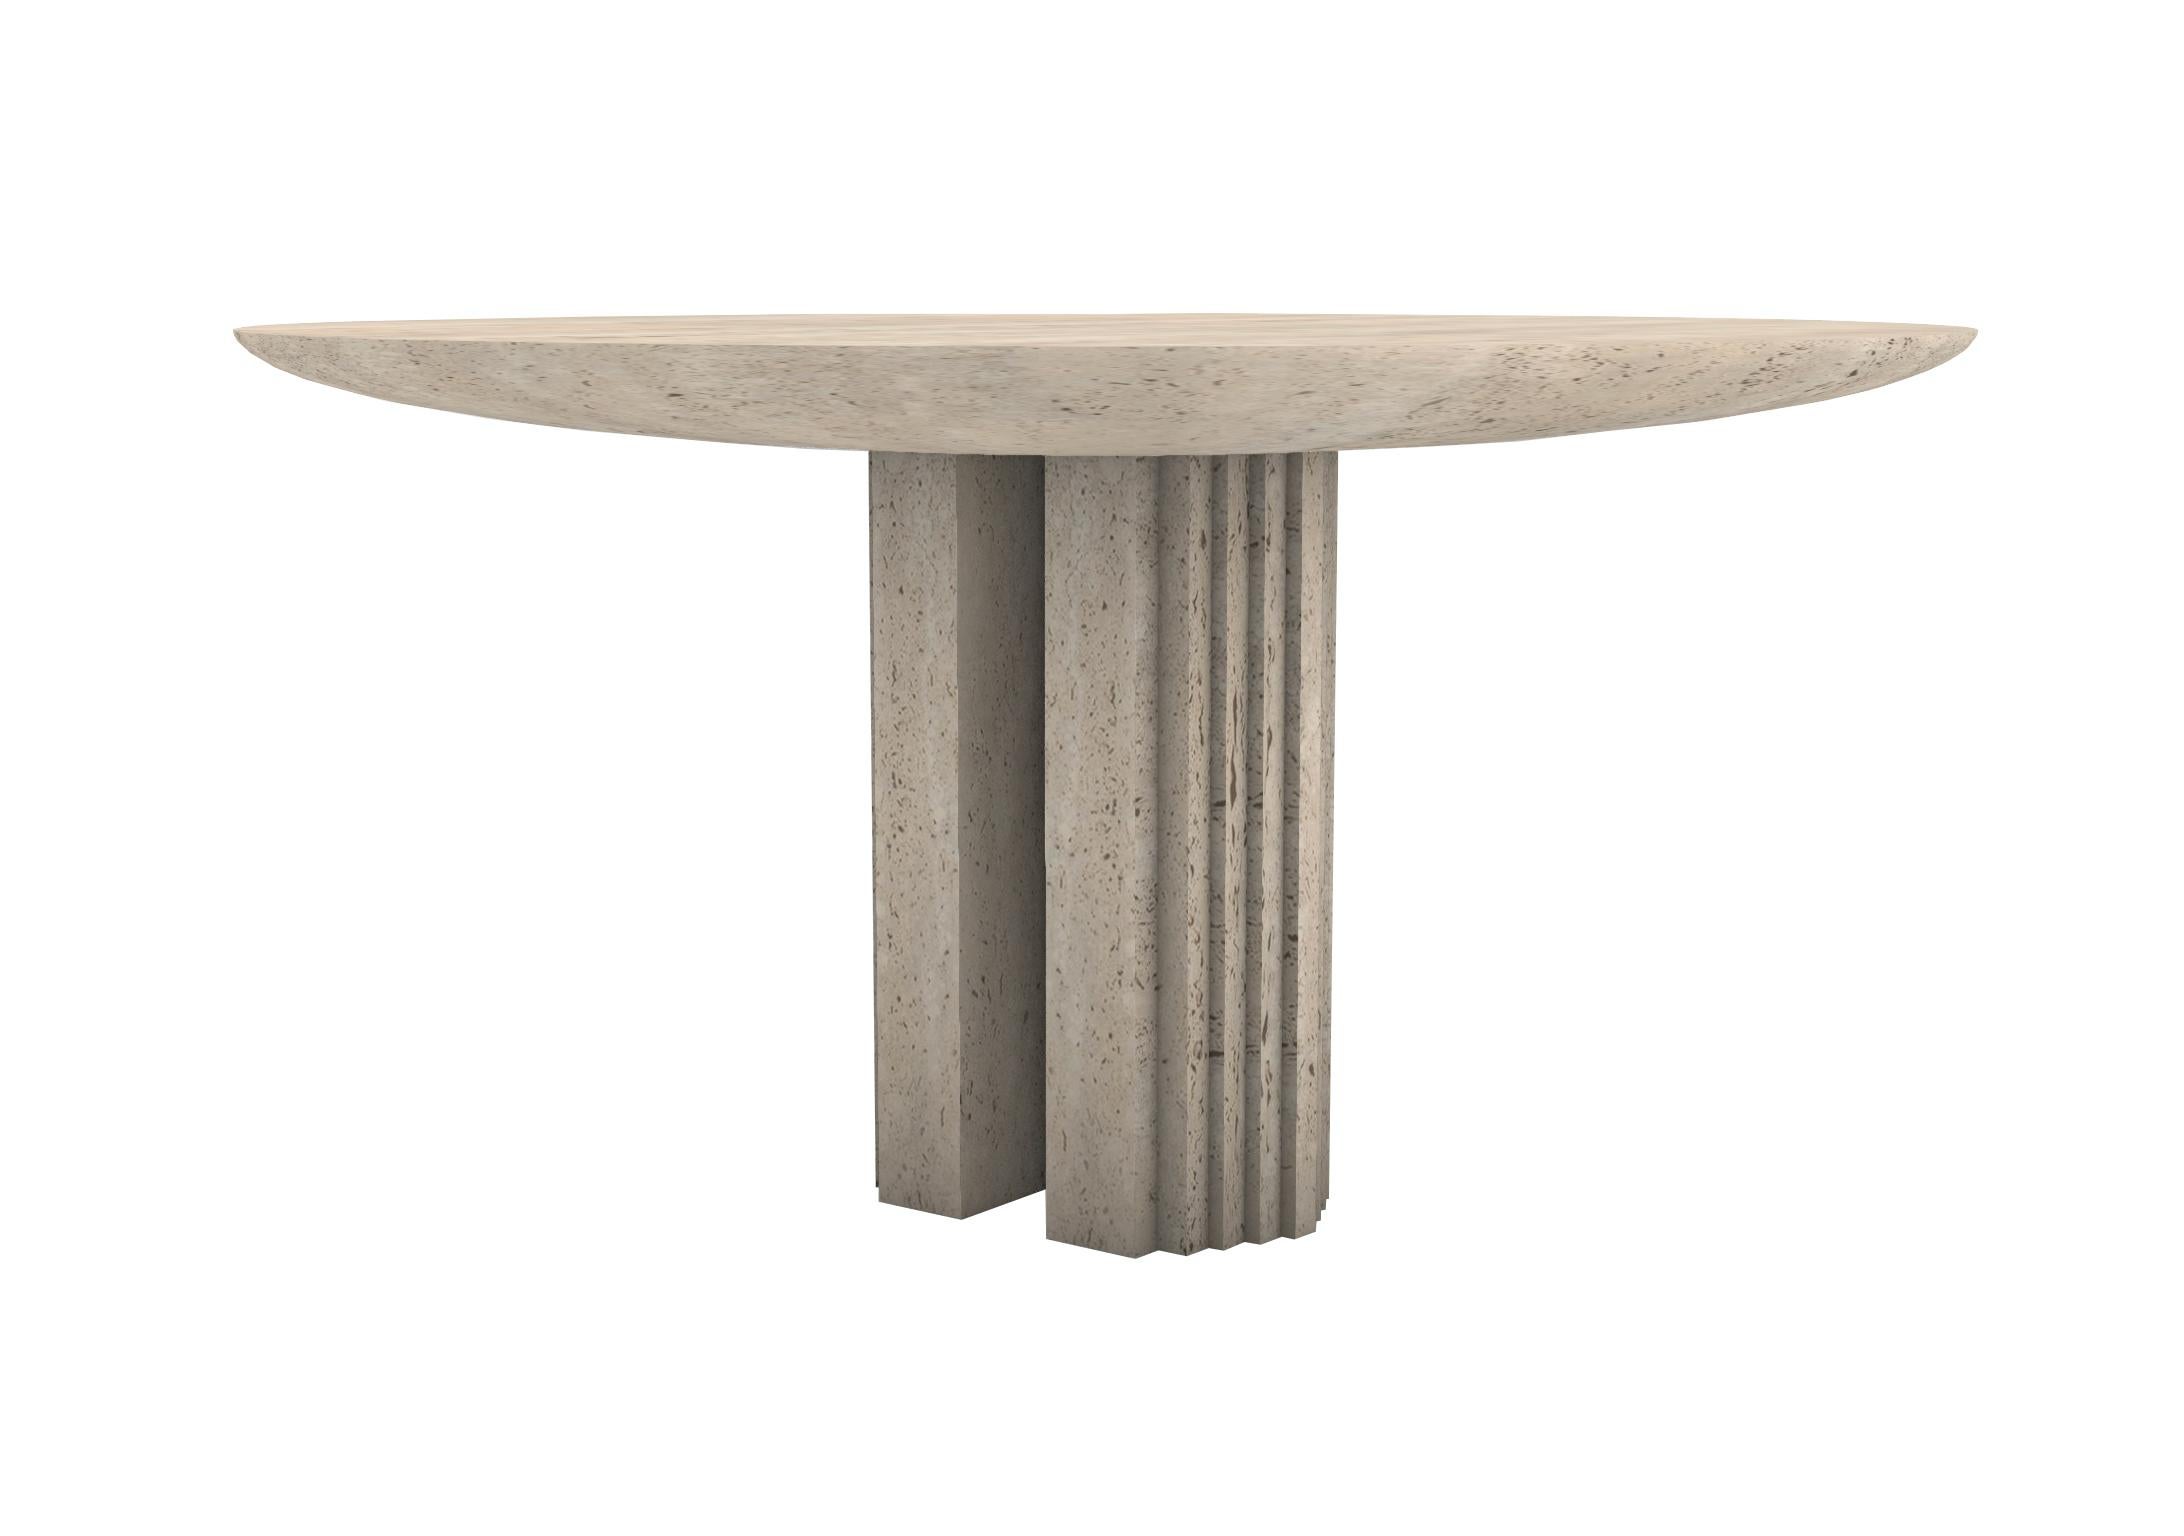 “Dining table 0024c” is a sculptural table in Travertine created by the artist Desia Ava. 
The piece features strong lines and gentle curves. Marked by architectural aesthetics, on the borderline between sculpture and furniture the Marble block has